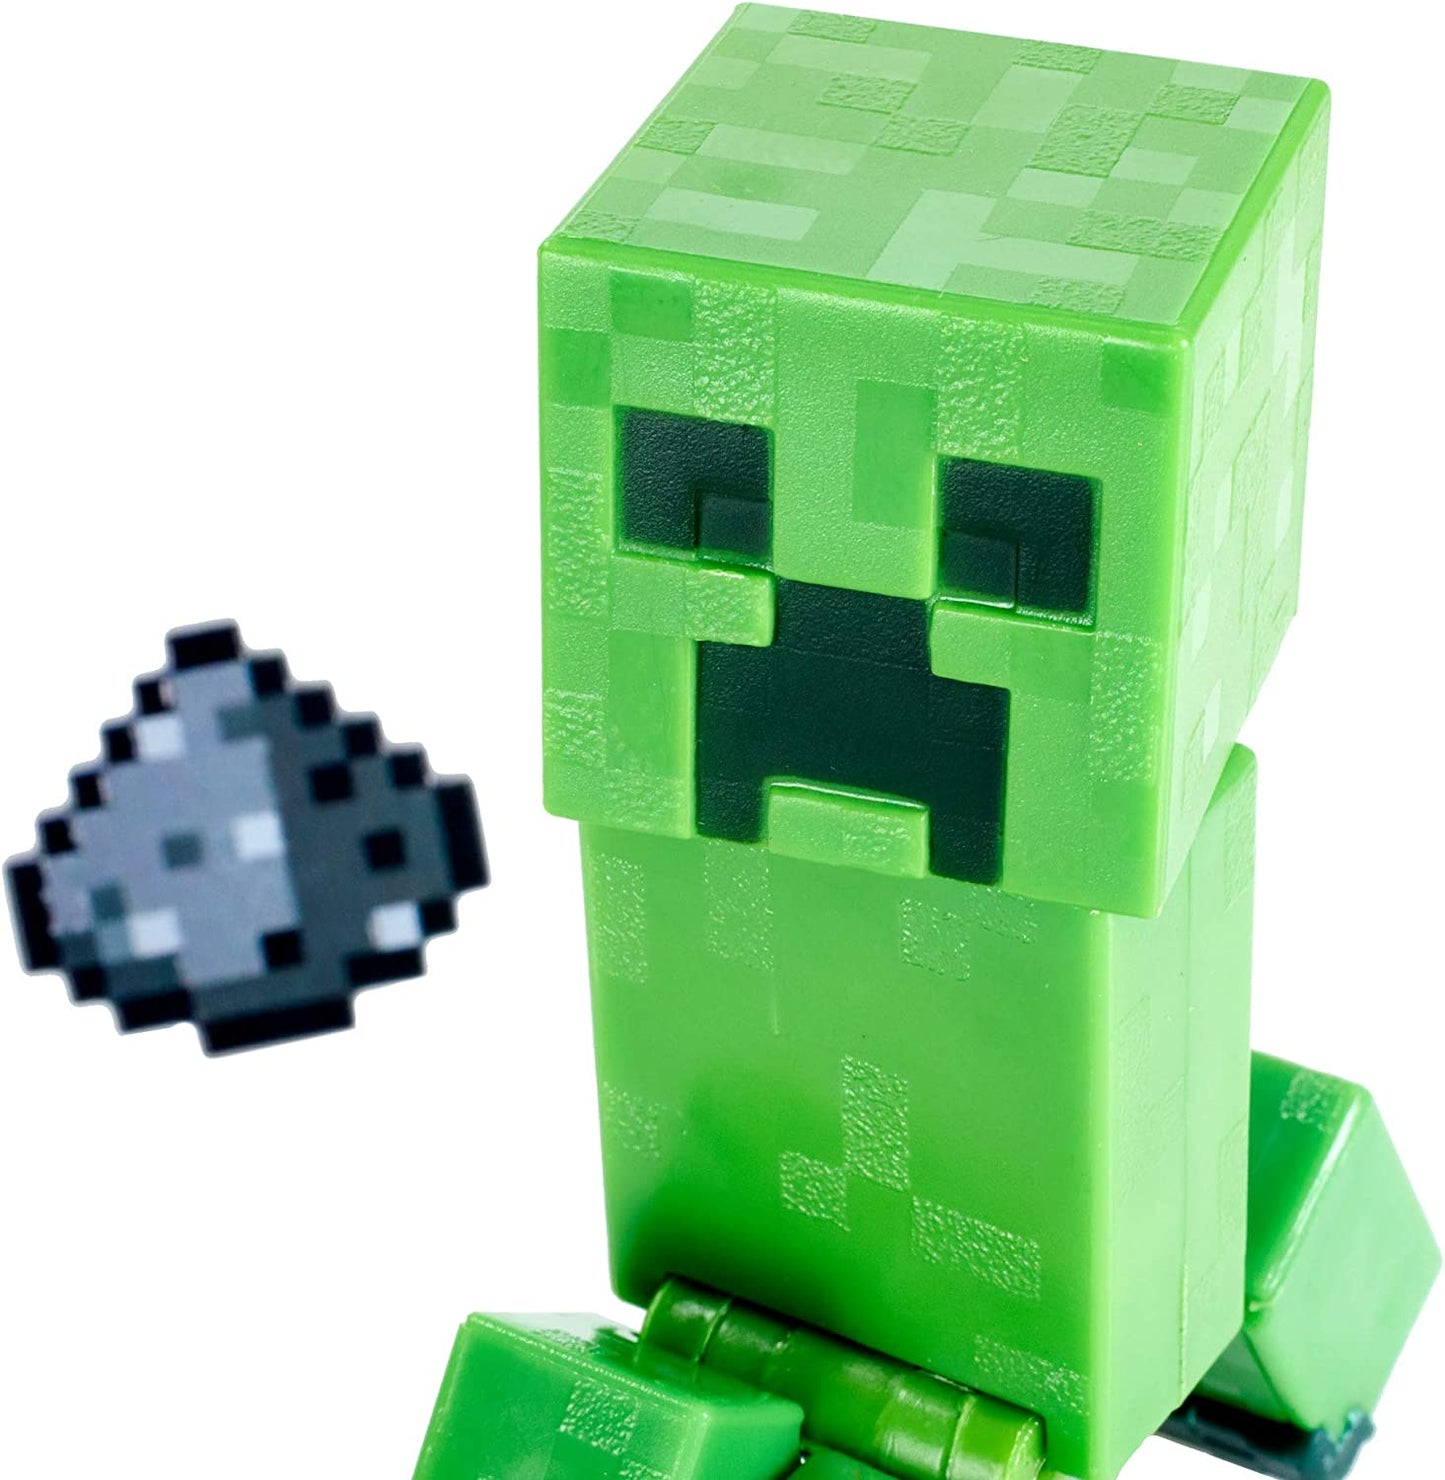 Minecraft 3 Inch Mini Figure - Creeper with Accessory and Craft-a-Block